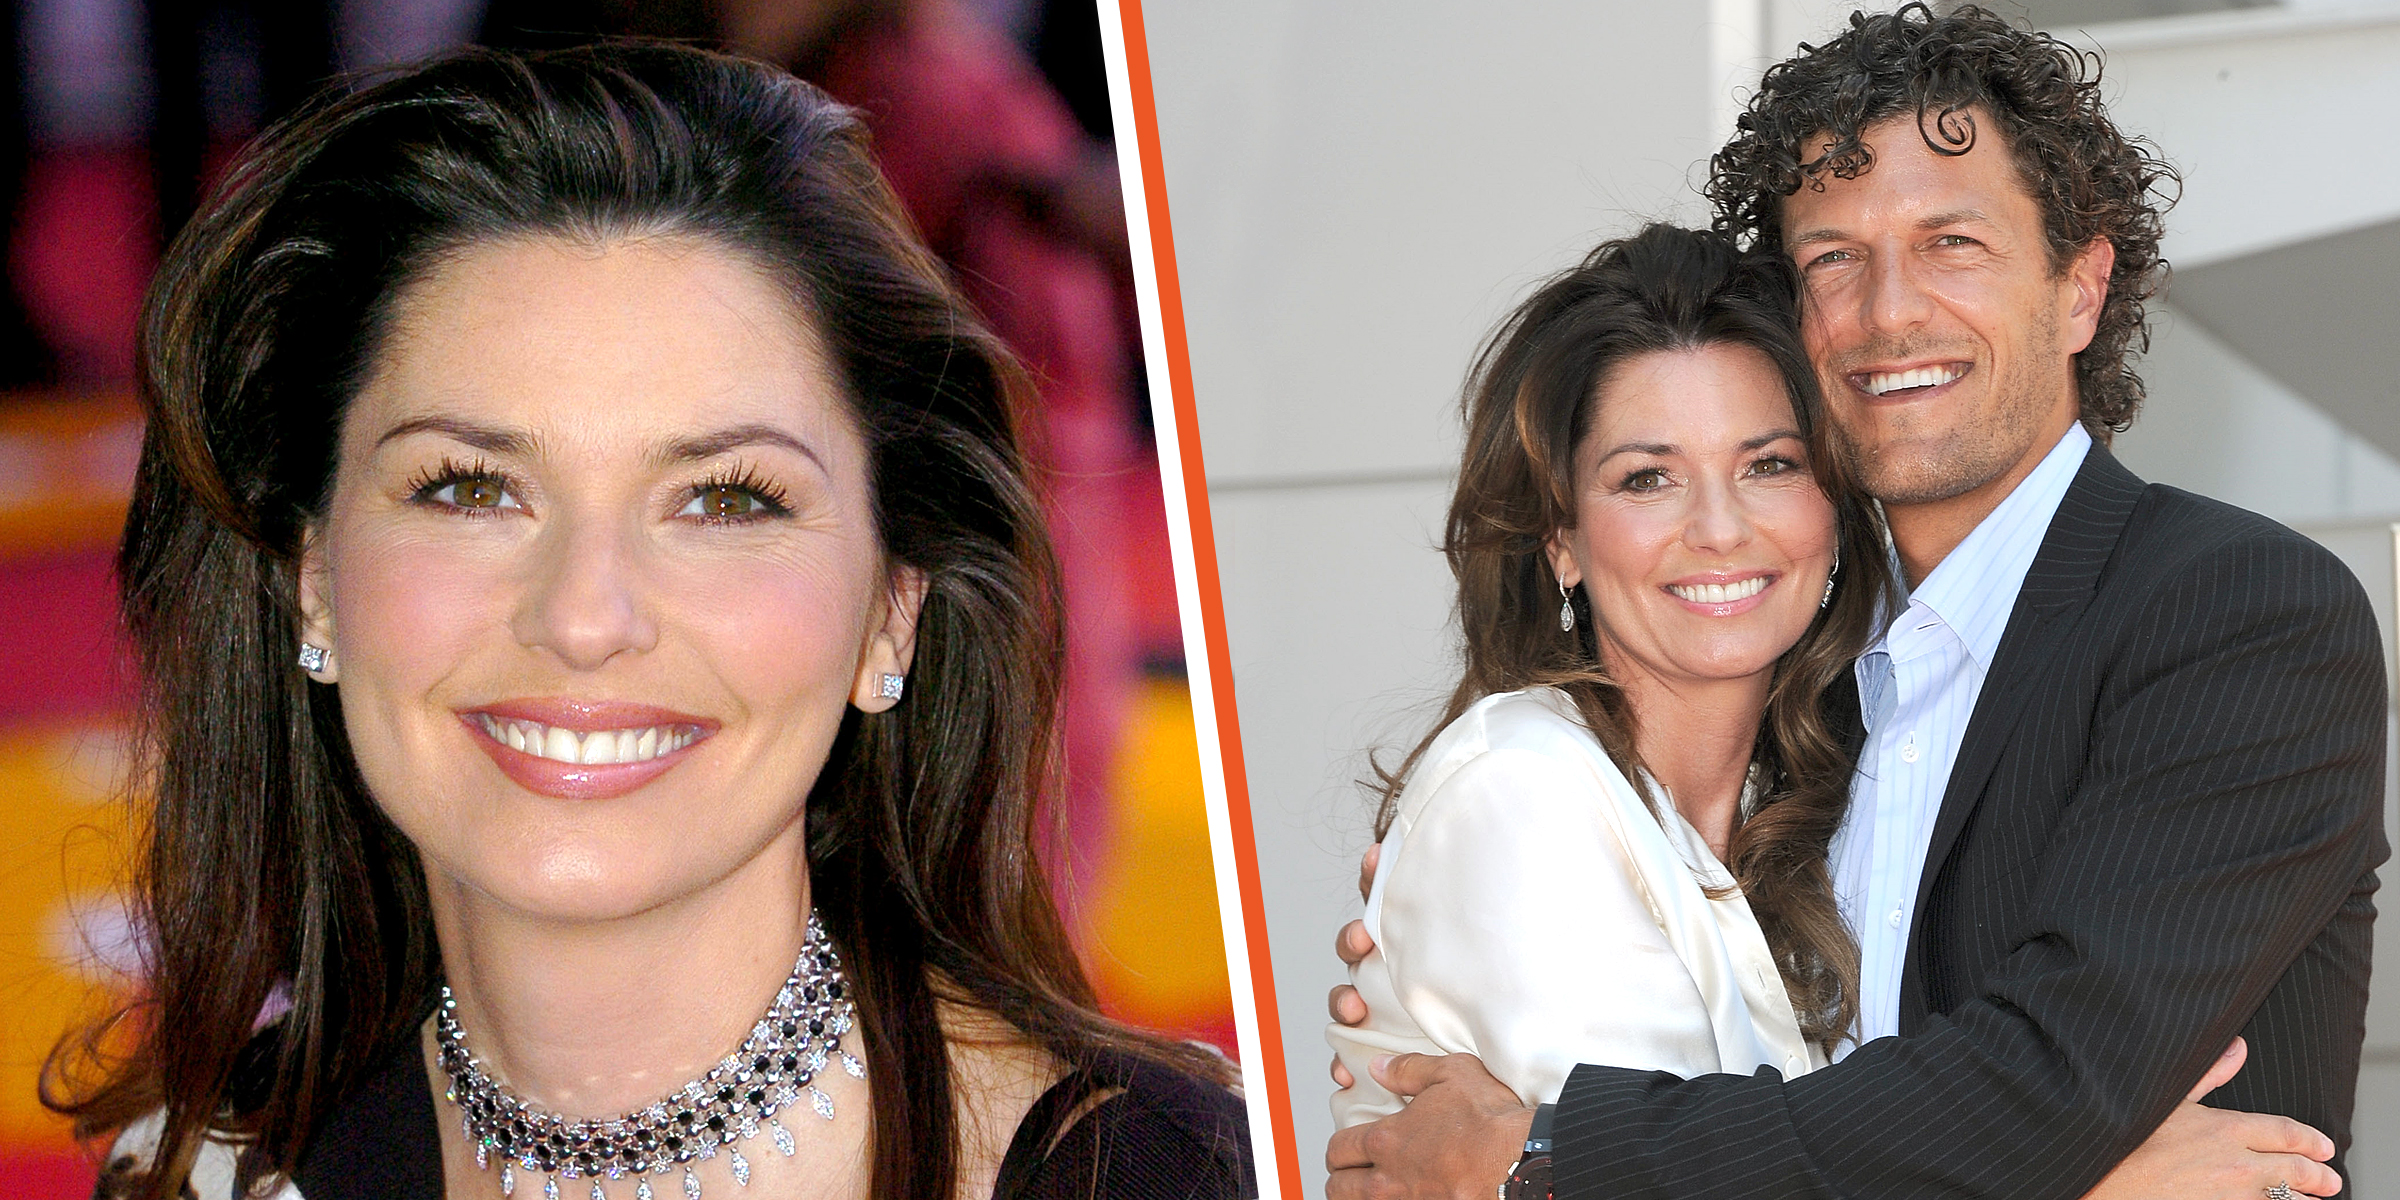 Shania Twain | Frederic Thiebaud and Shania Twain | Source: Getty Images